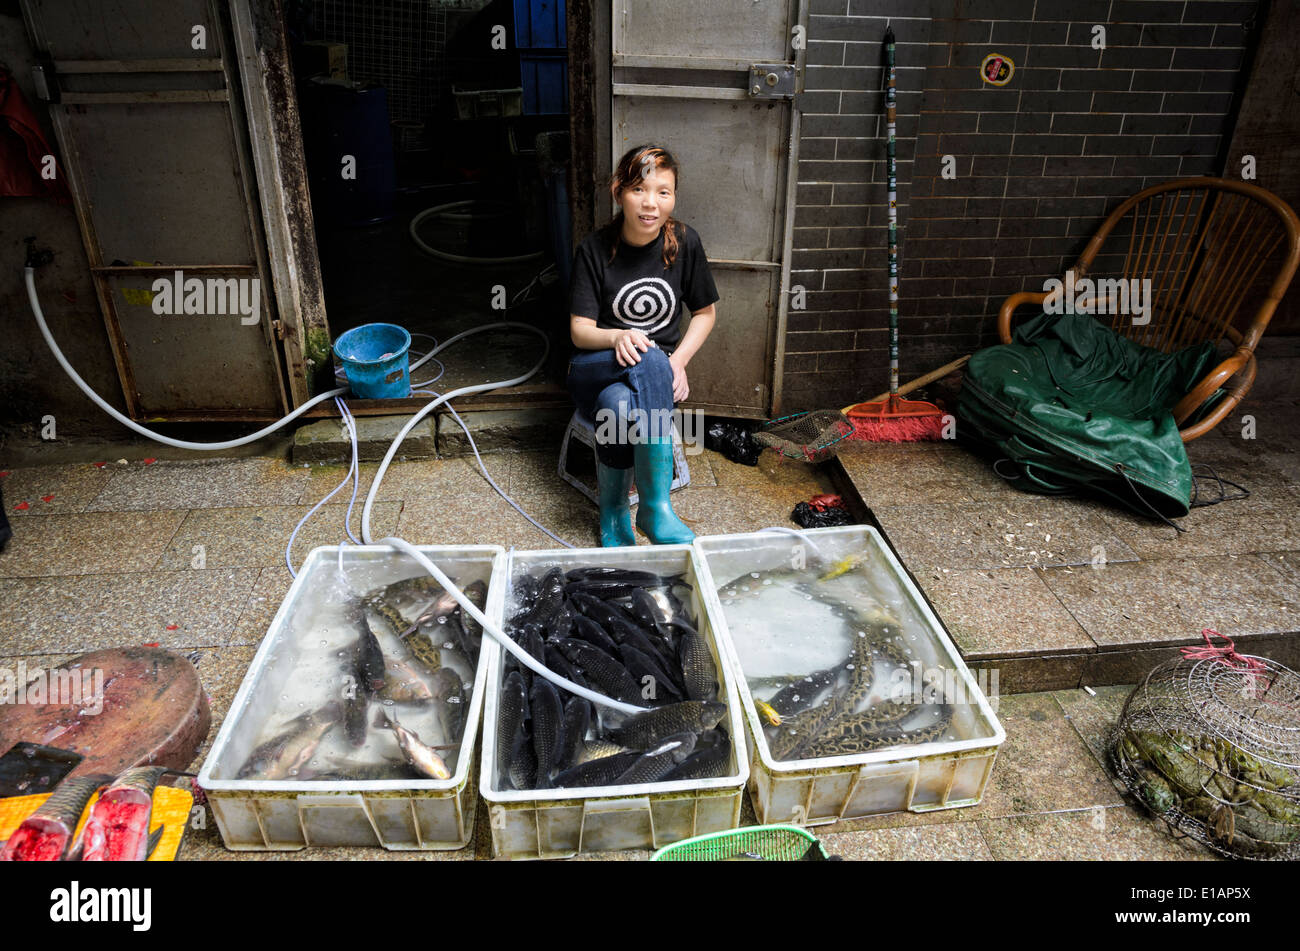 Young woman looks after a fish stall selling live, i.e. very fresh, fish at a Chinese market Stock Photo